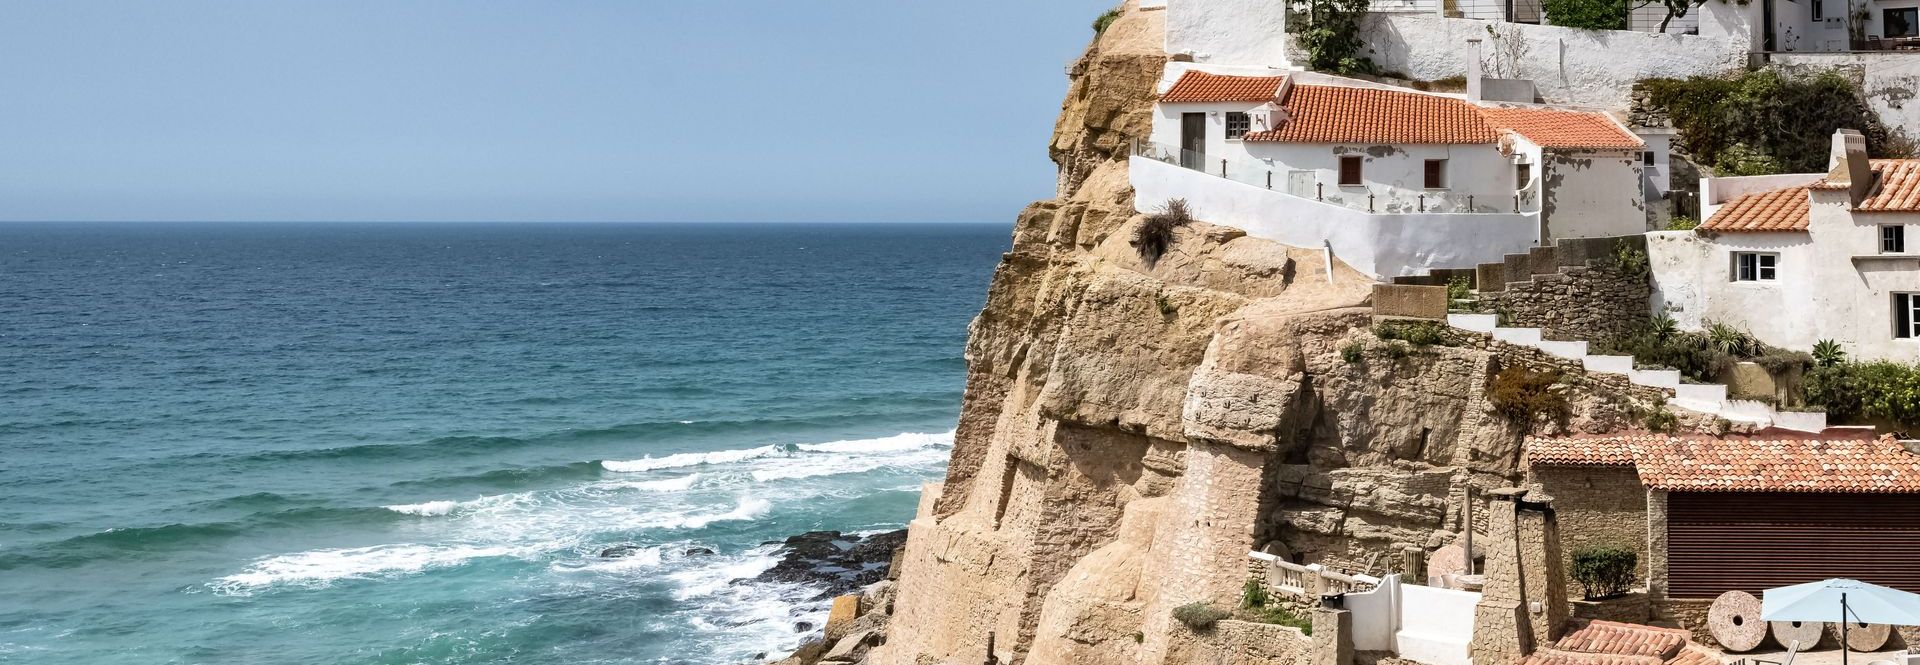 A house on top of a cliff overlooking the ocean.